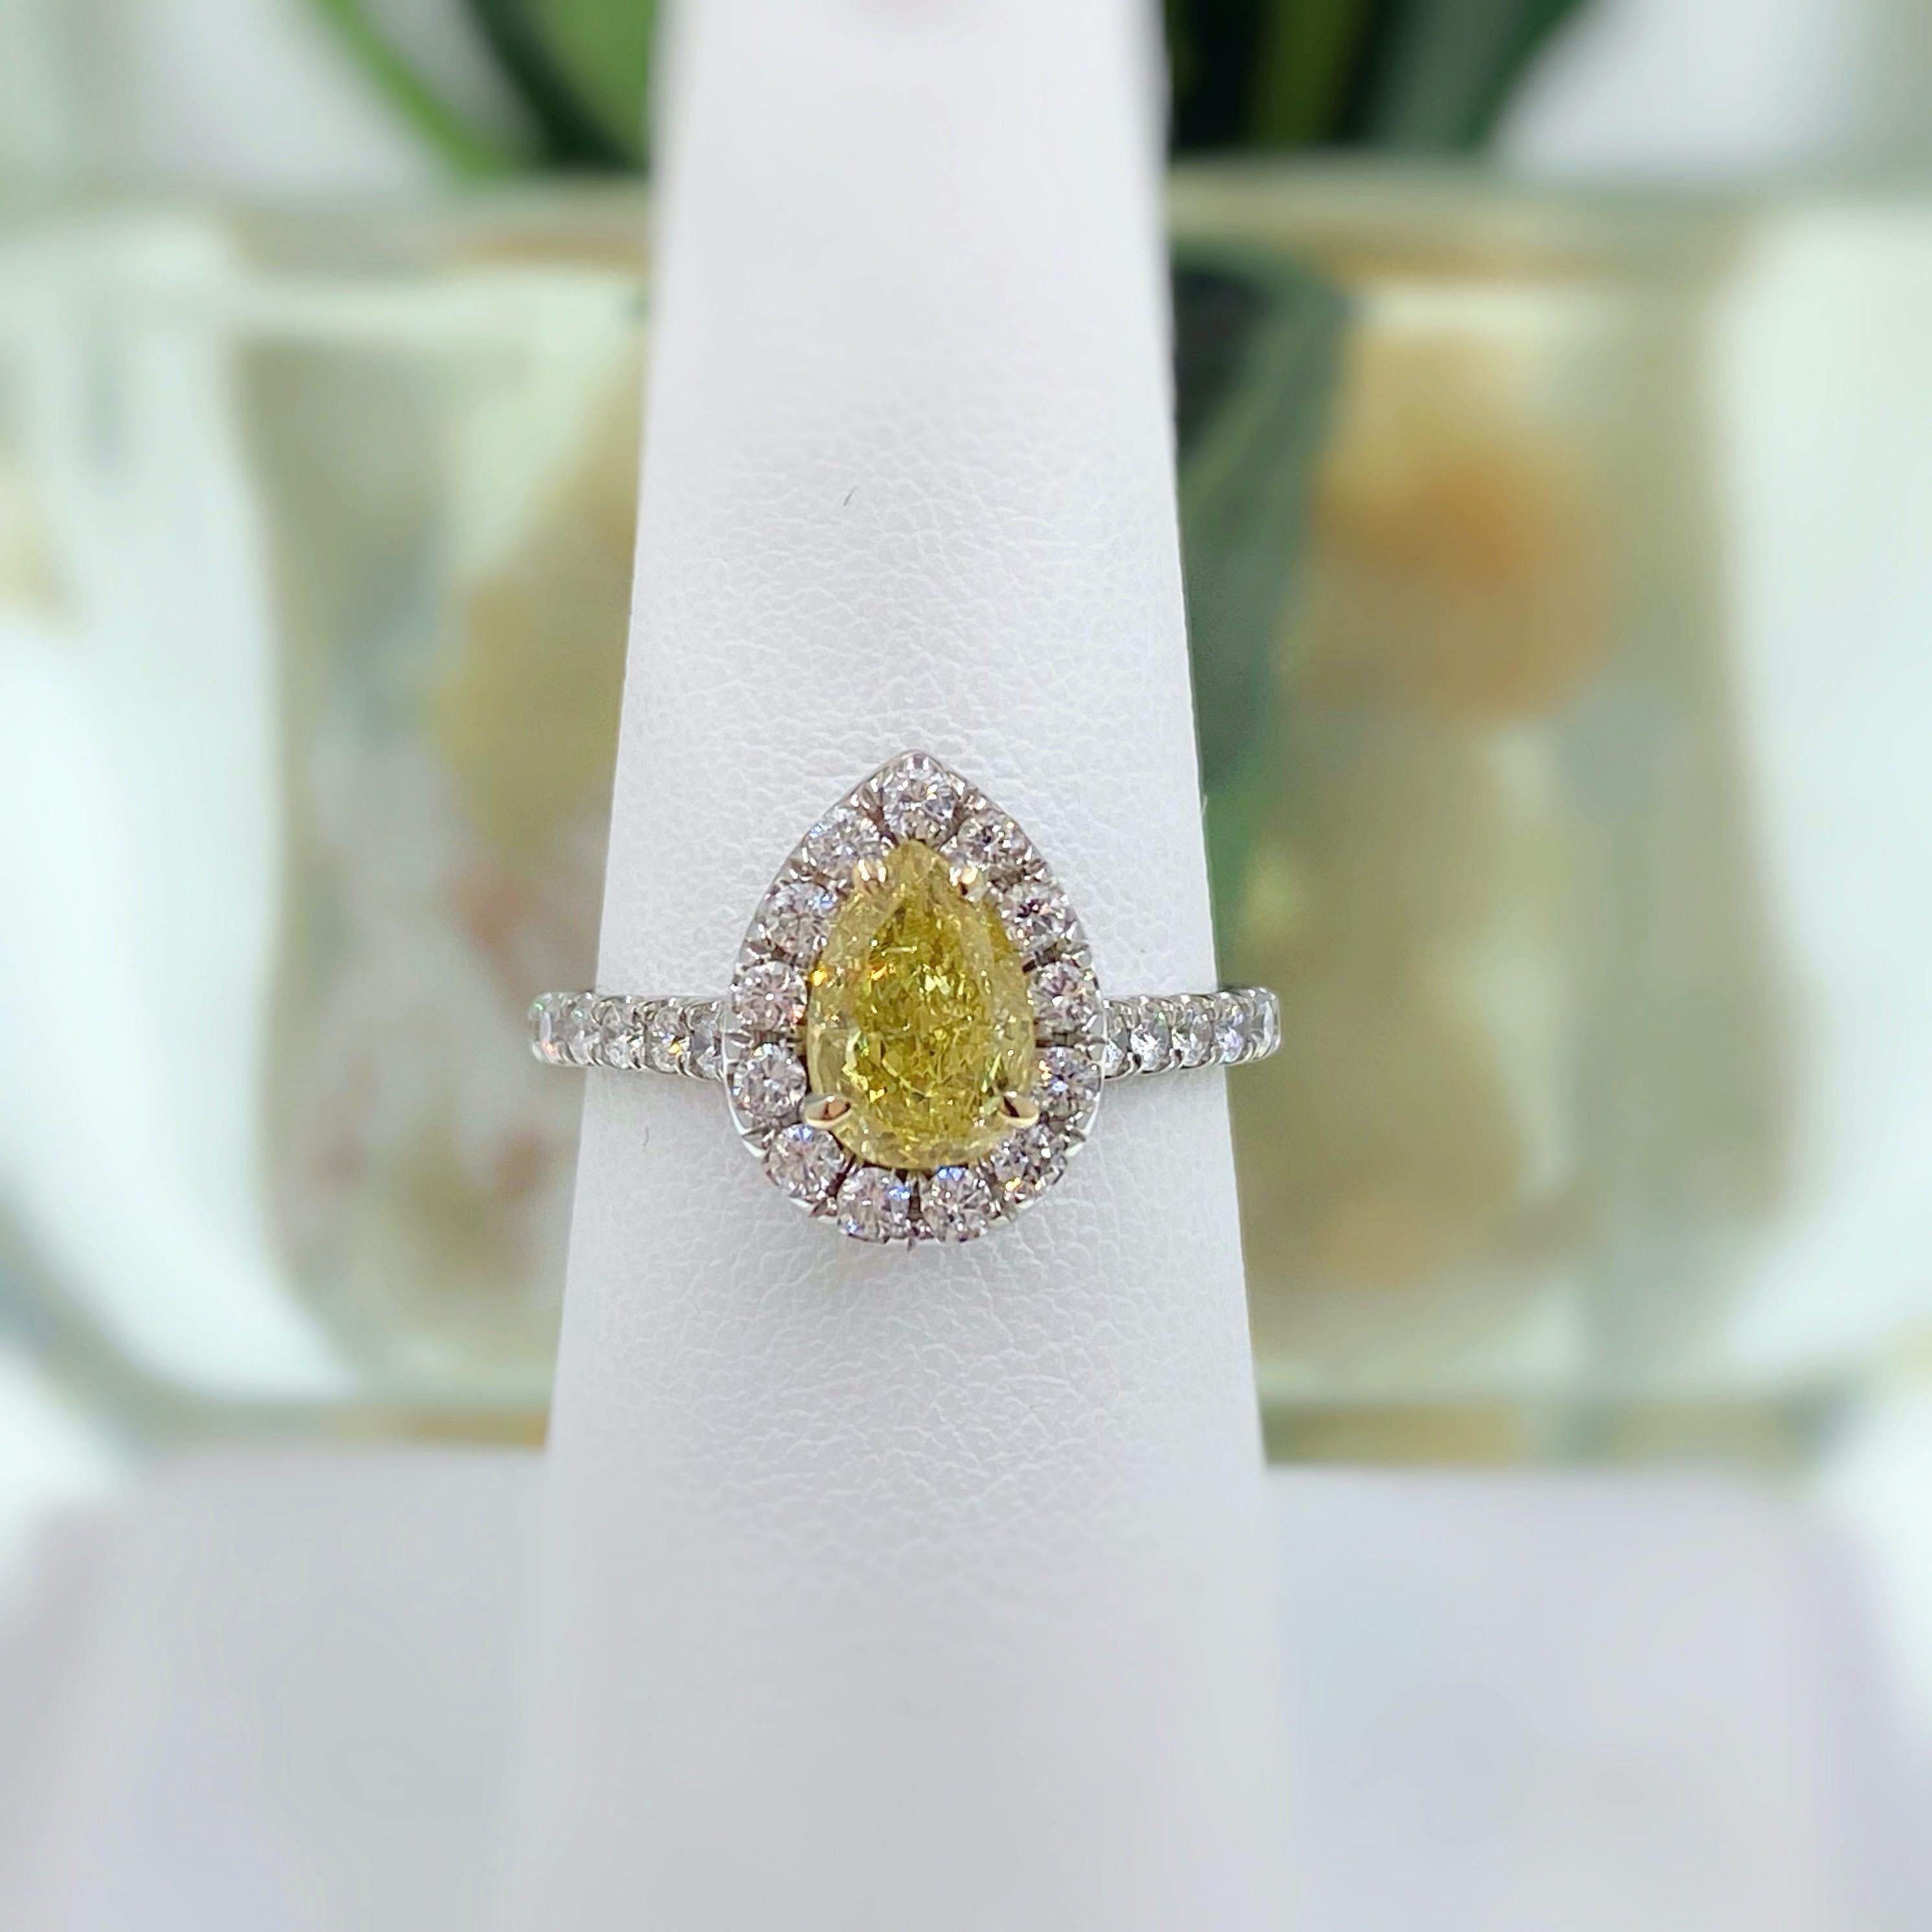 Fancy Intense Yellow Diamond Halo Engagement Ring

Style:  Custom made halo design with diamonds set halfway down sides of the ring
Metal: 14K white gold
TCW:  1.60 tcw
Main Diamond:  1.00 carat Pear Shape, measures 7.79 x 5.37 x 3.18 mm
Color &